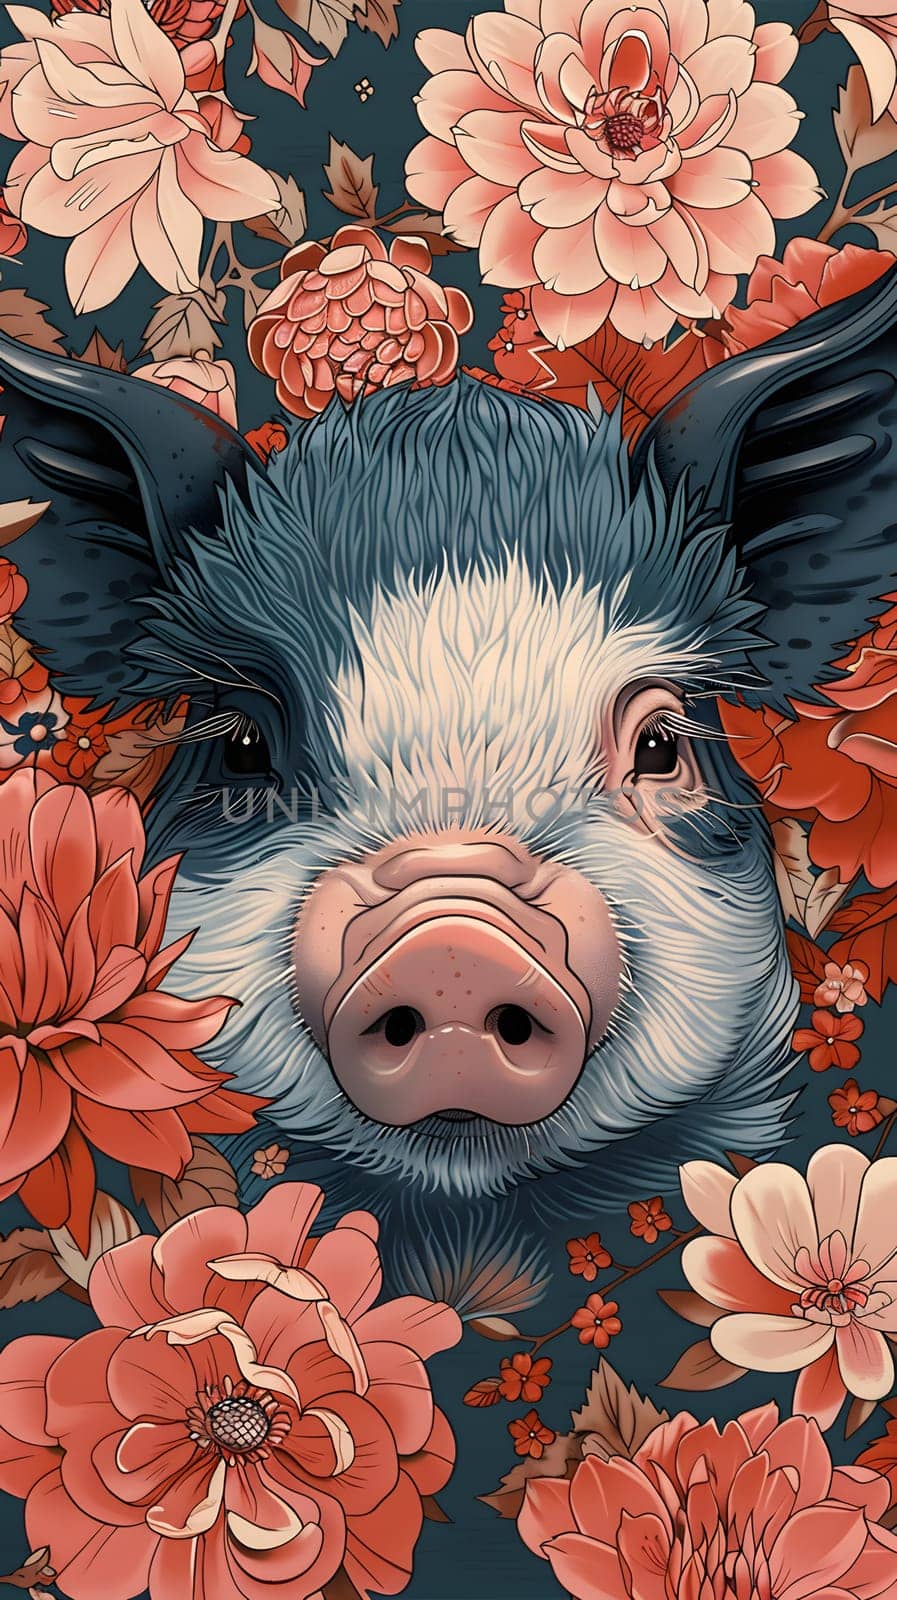 A pig painting among pink flowers, blending nature and art beautifully by Nadtochiy